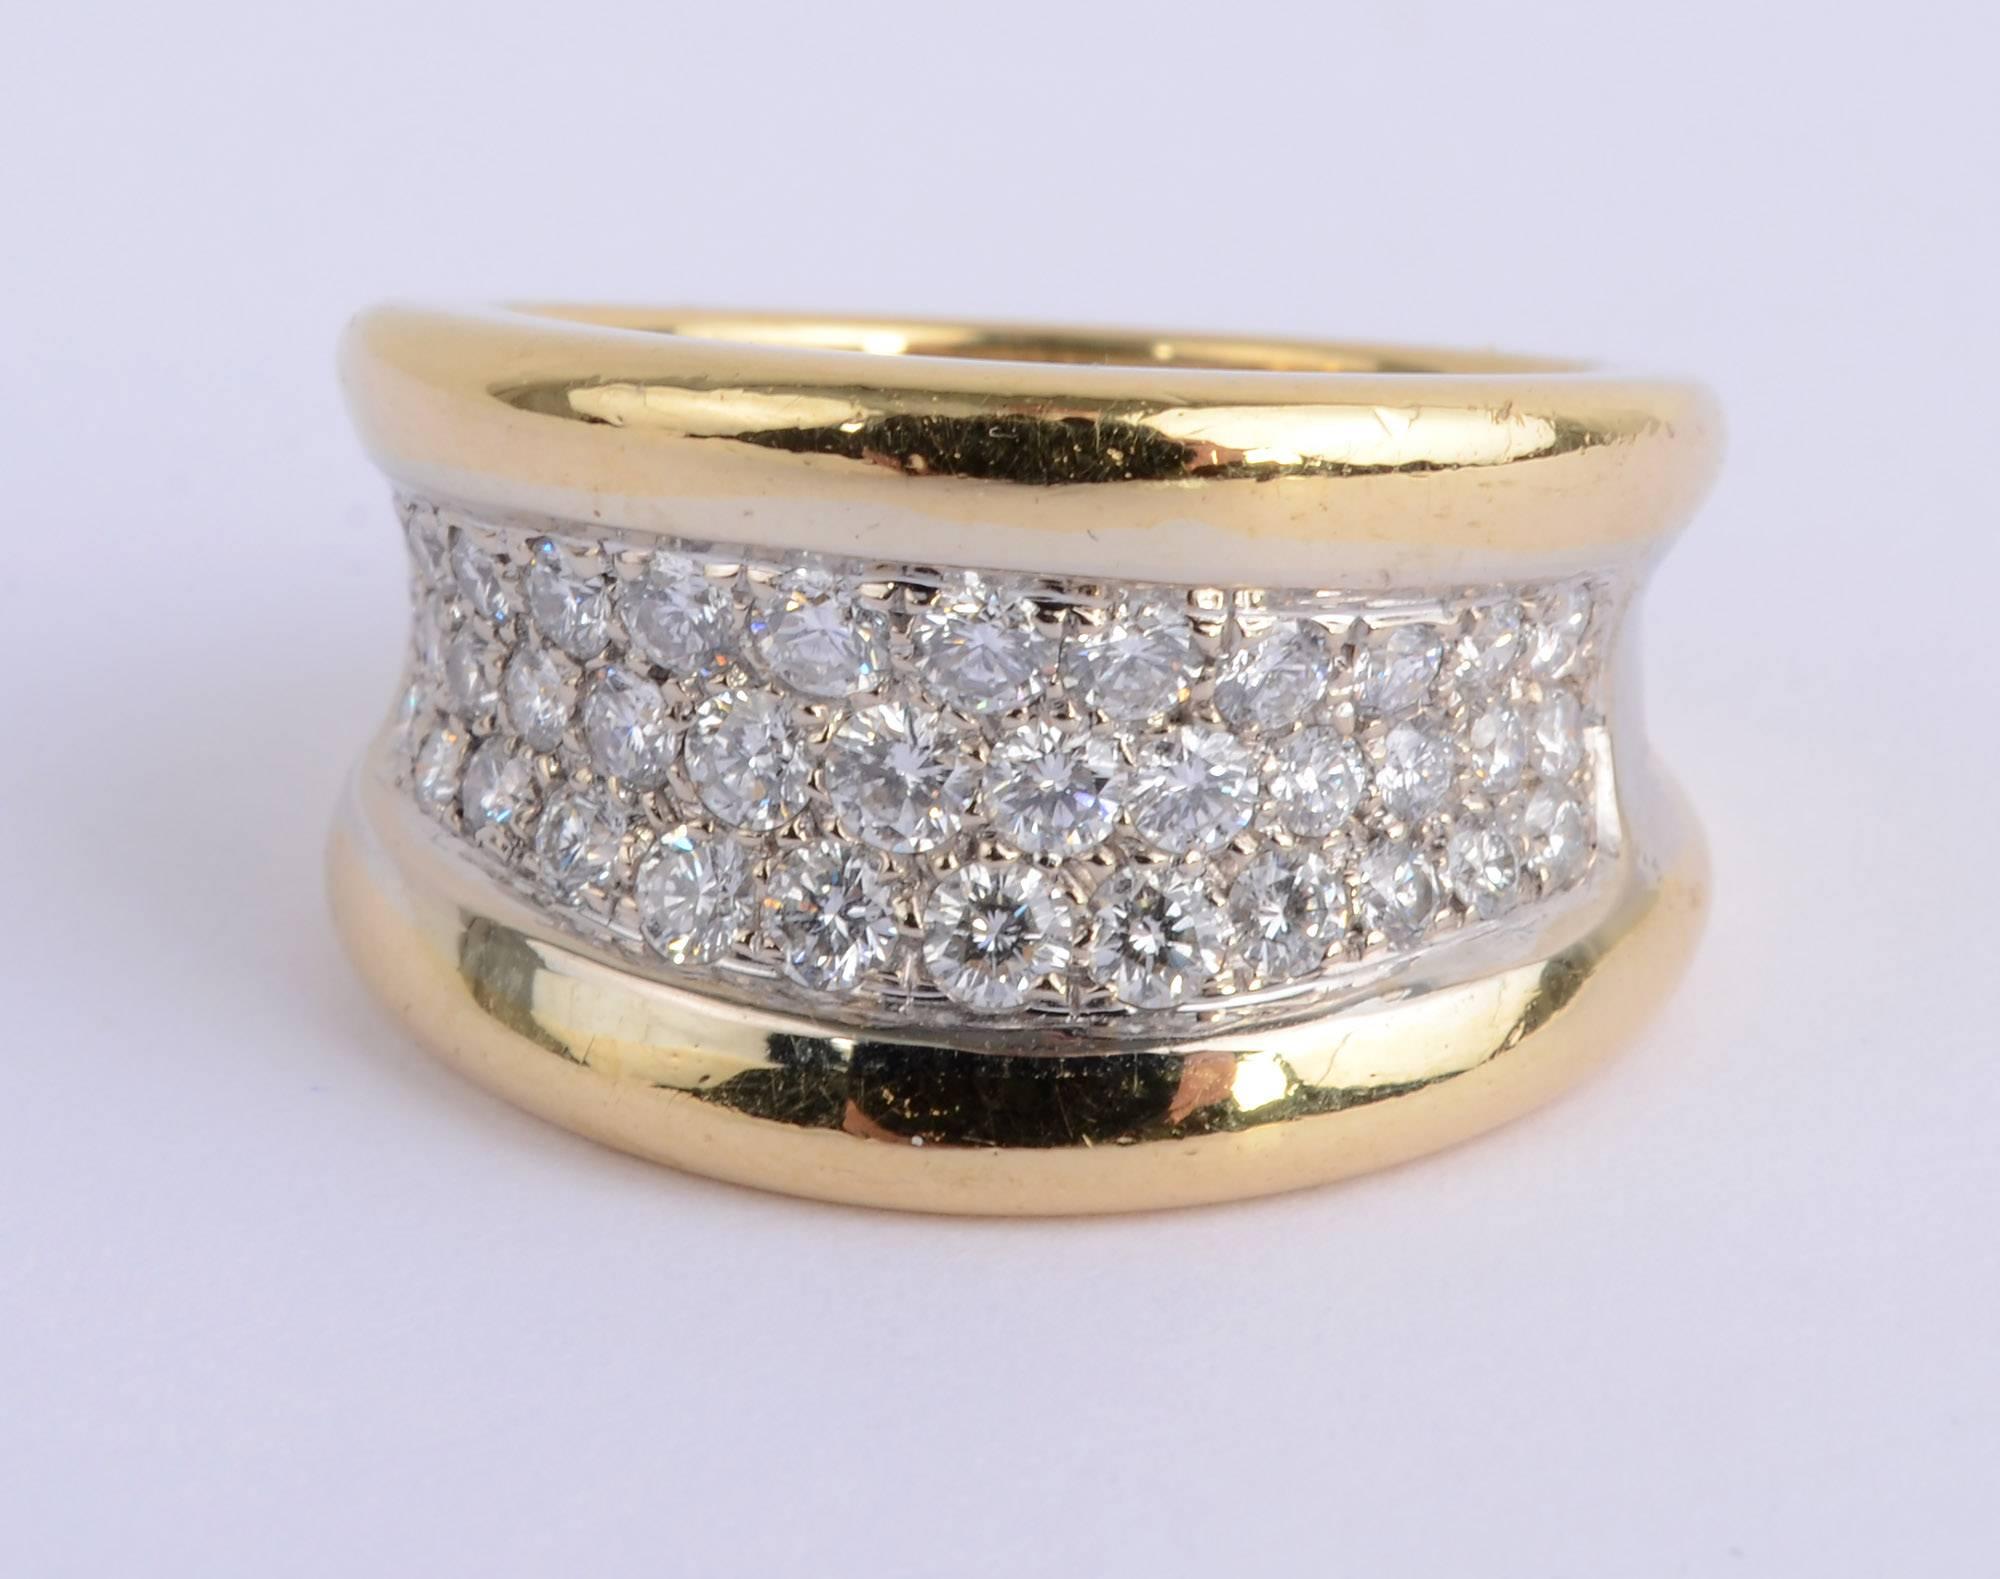 Concave band ring by Spark in which 37 diamonds weighing 1.2 carats are set in the center. The stones are G-VS quality. The ring is half an inch in the front, tapering to a quarter of an inch in the back, making it very comfortable to wear. It is